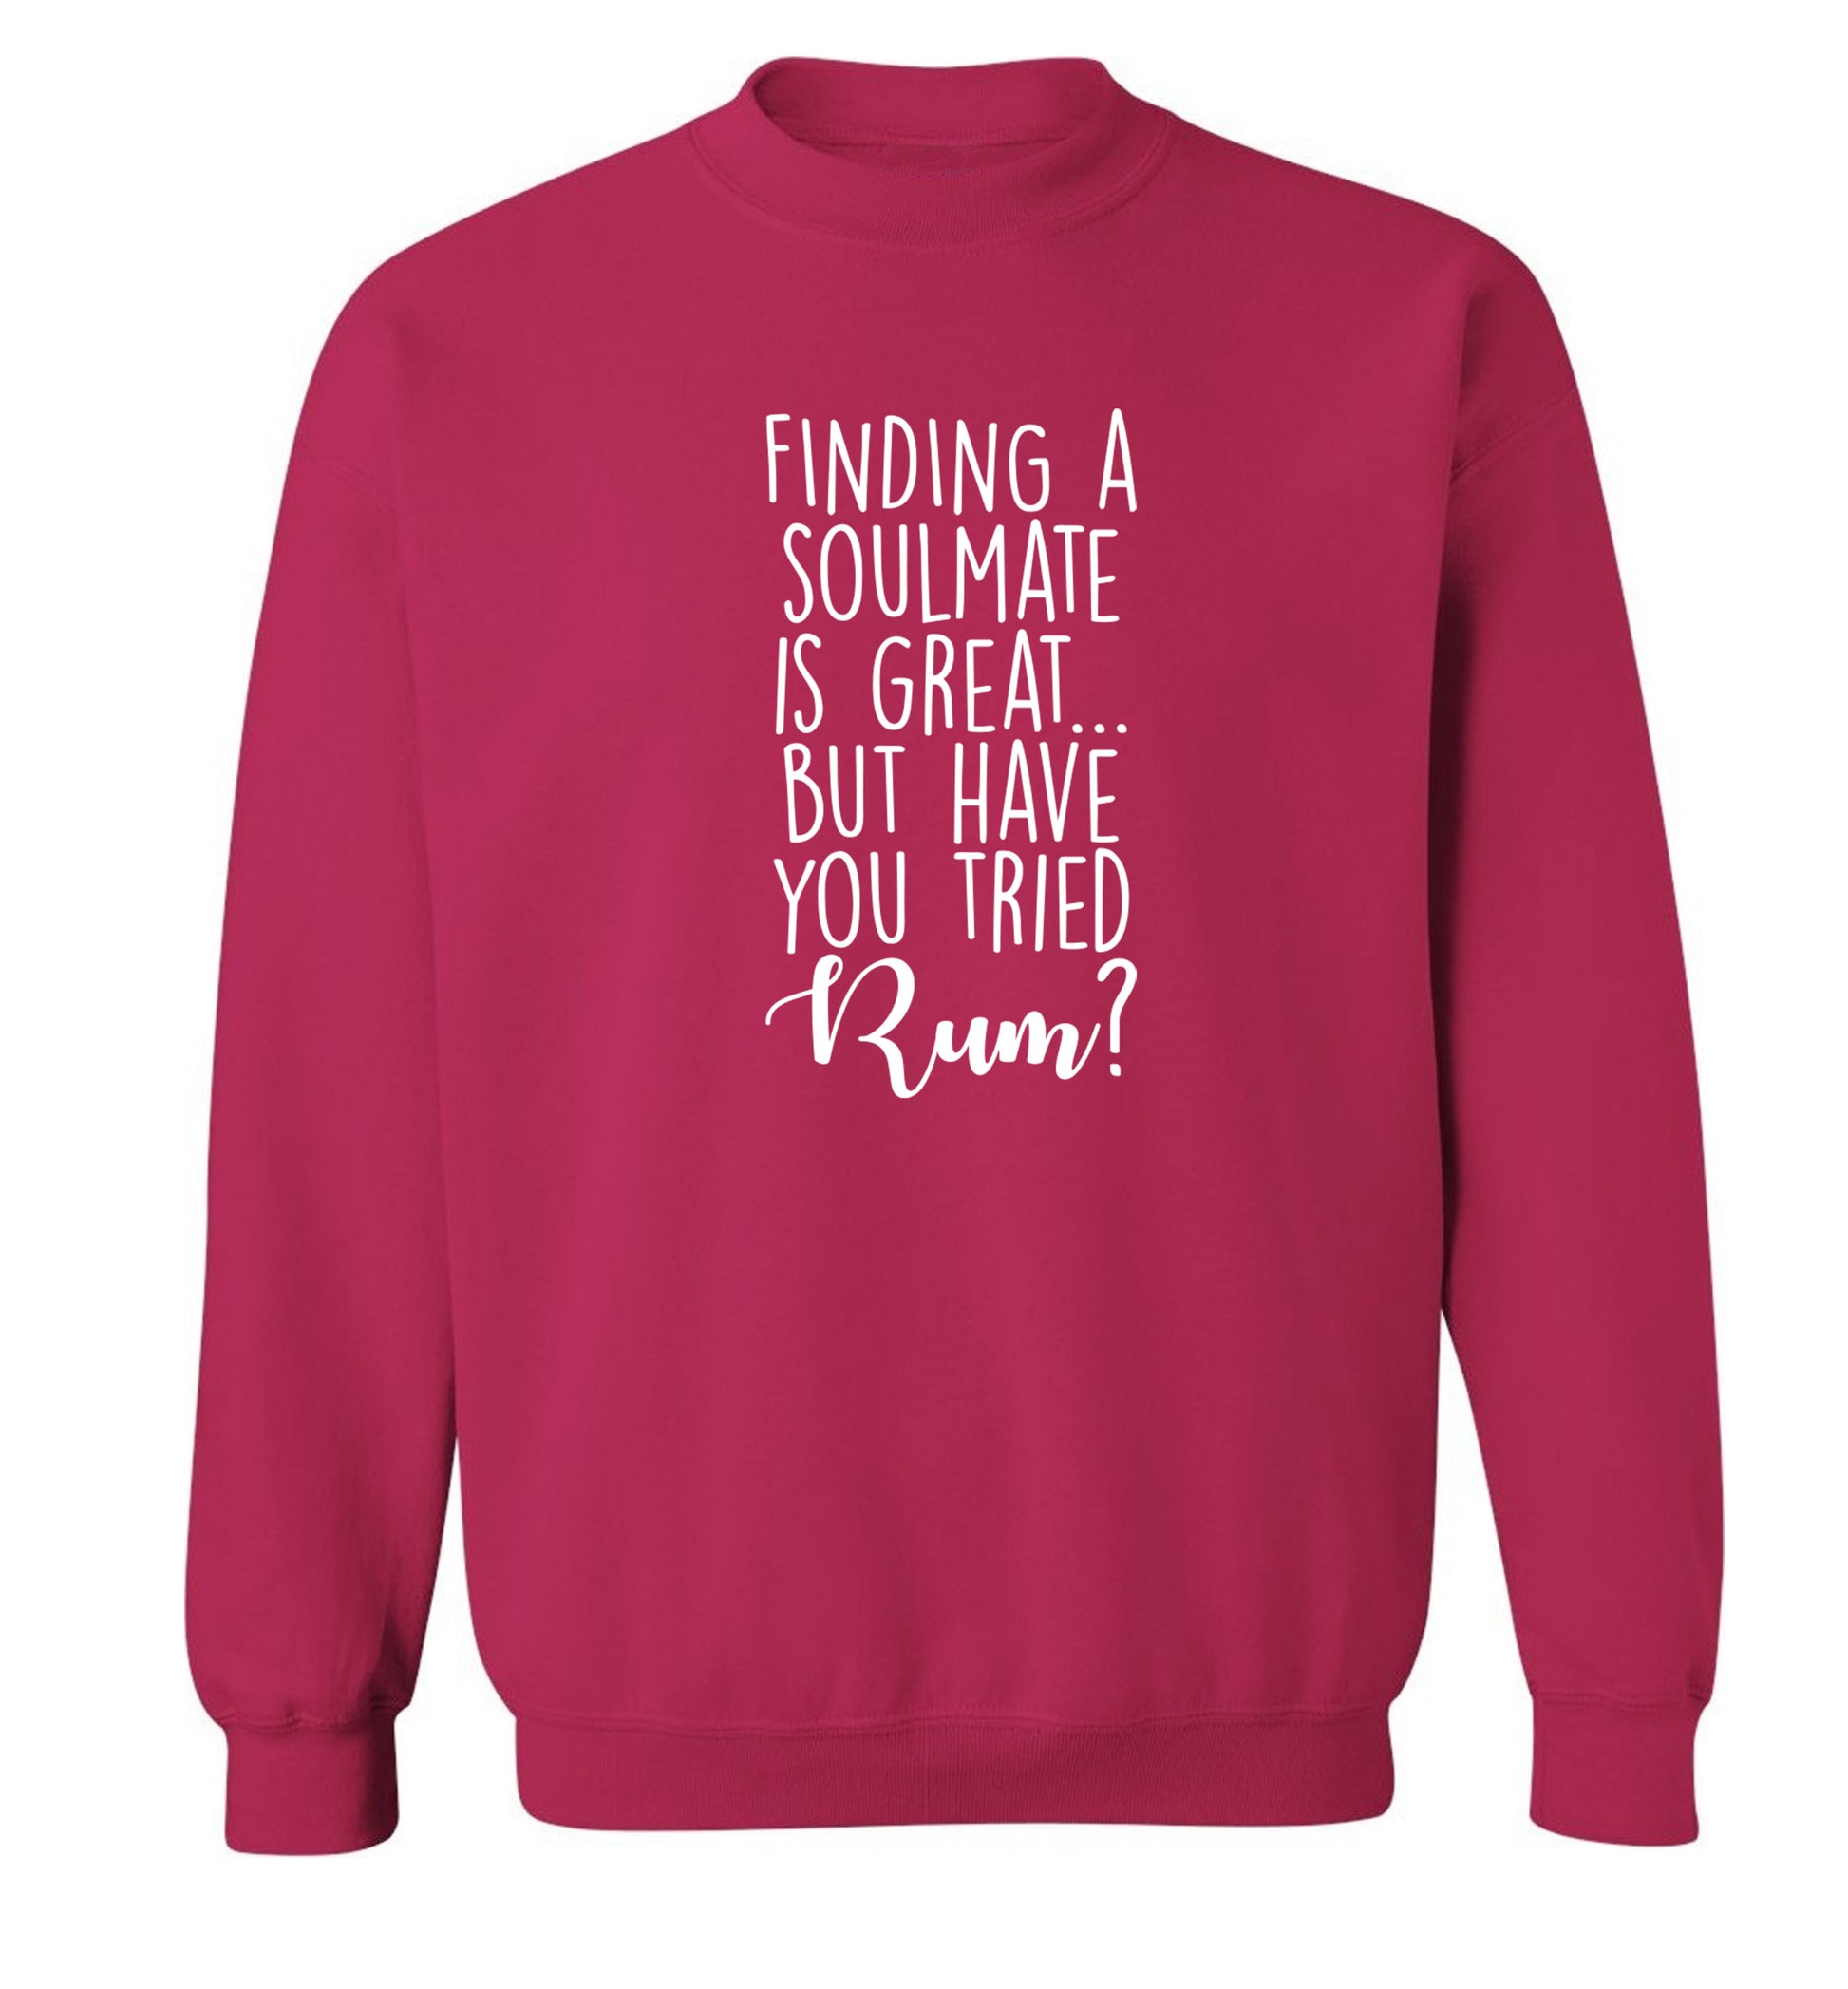 Finding a soulmate is great but have you tried rum? Adult's unisex pink Sweater 2XL